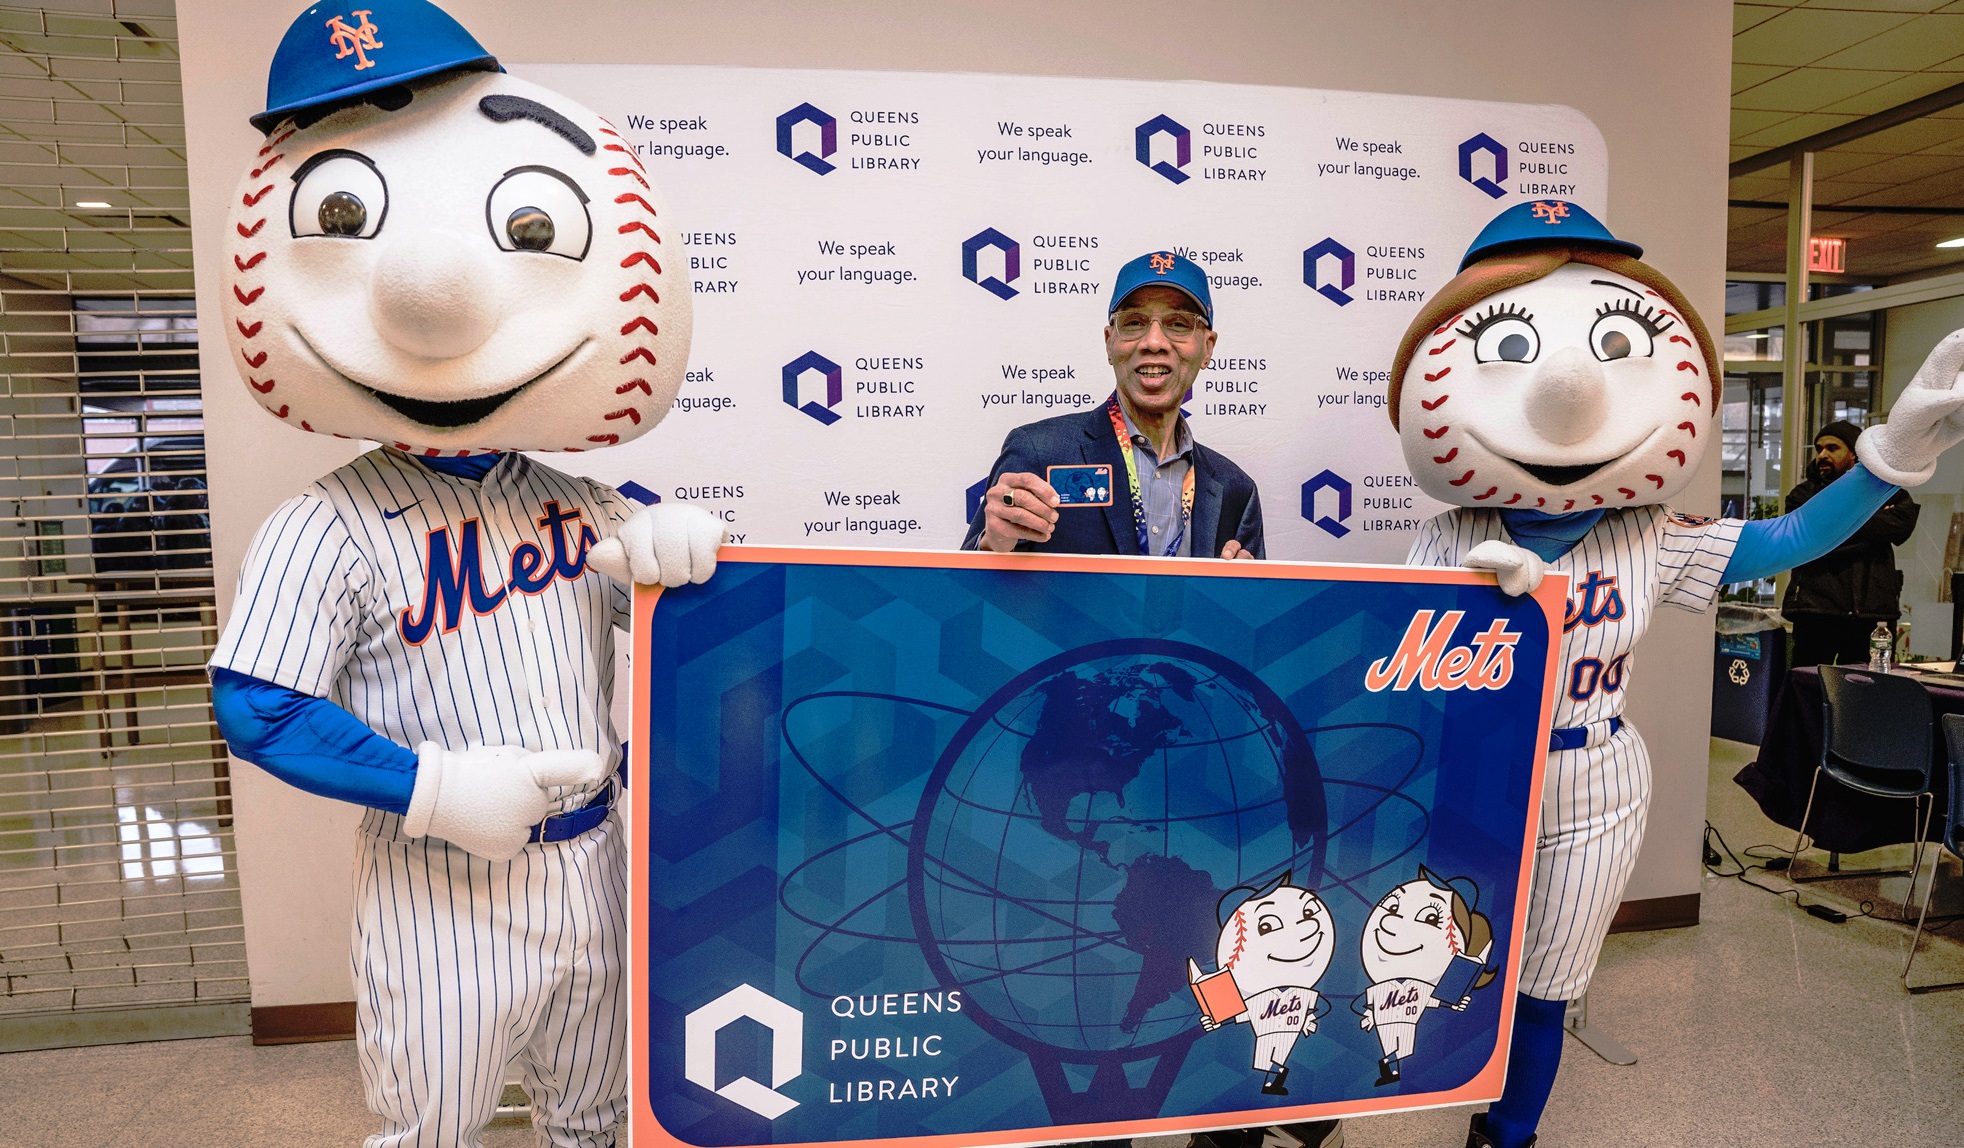 We're teaming up with the New York Mets to bring you this amazin' library card, while supplies last!